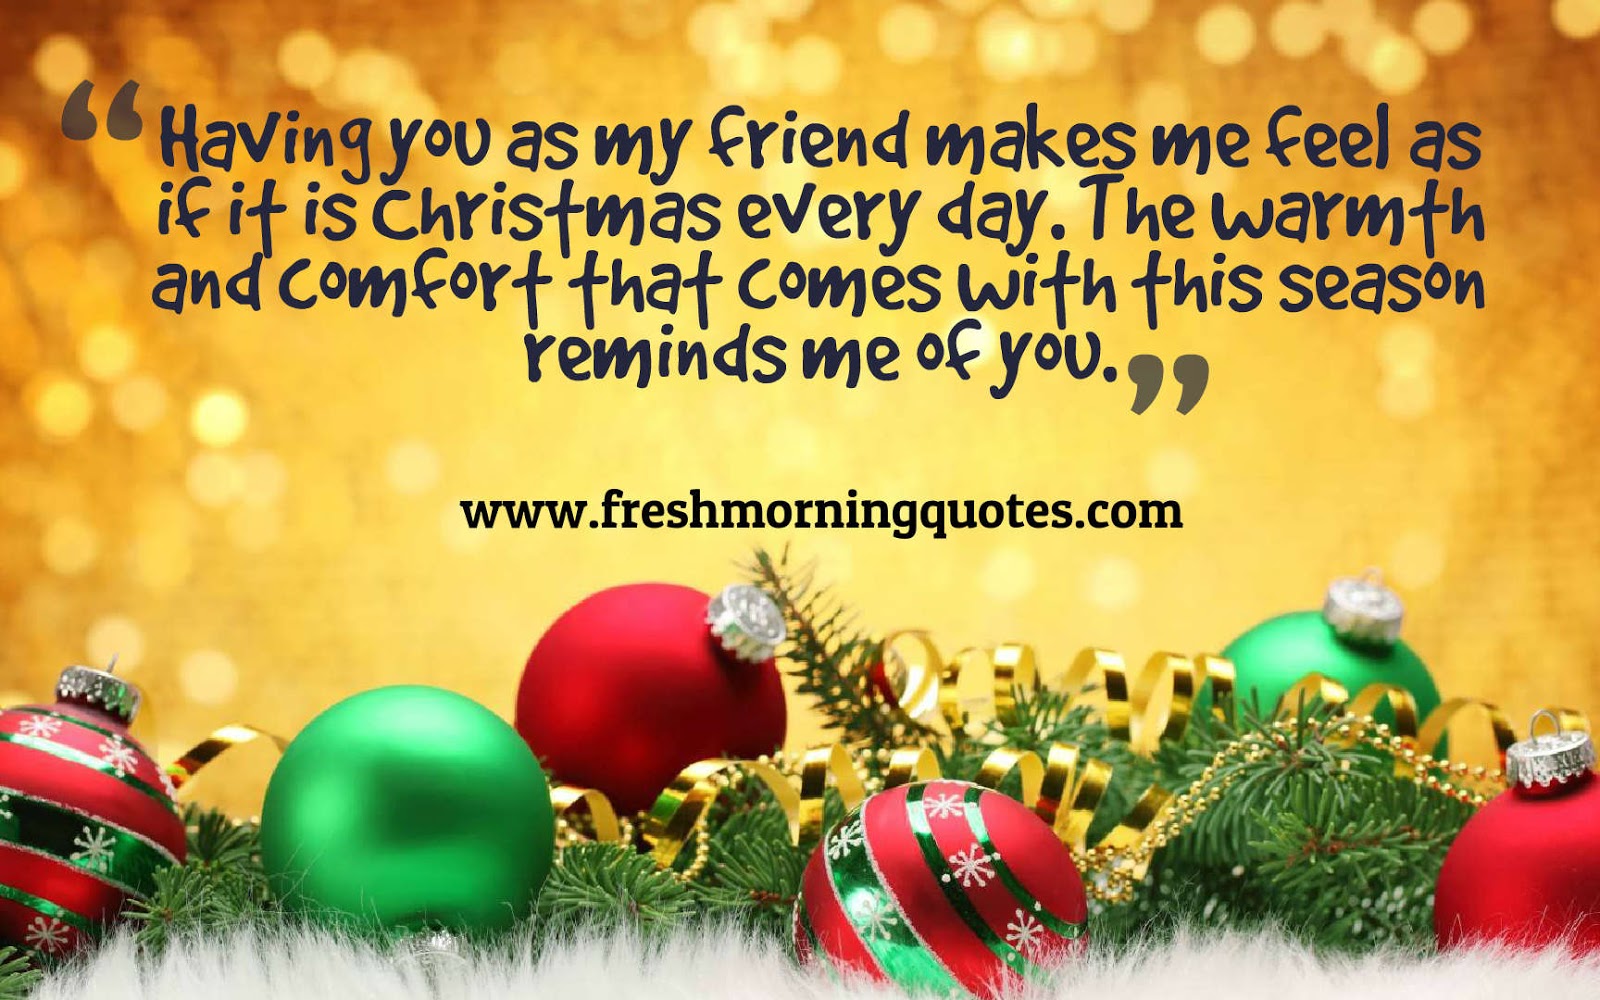 Best Christmas Wishes for Friends